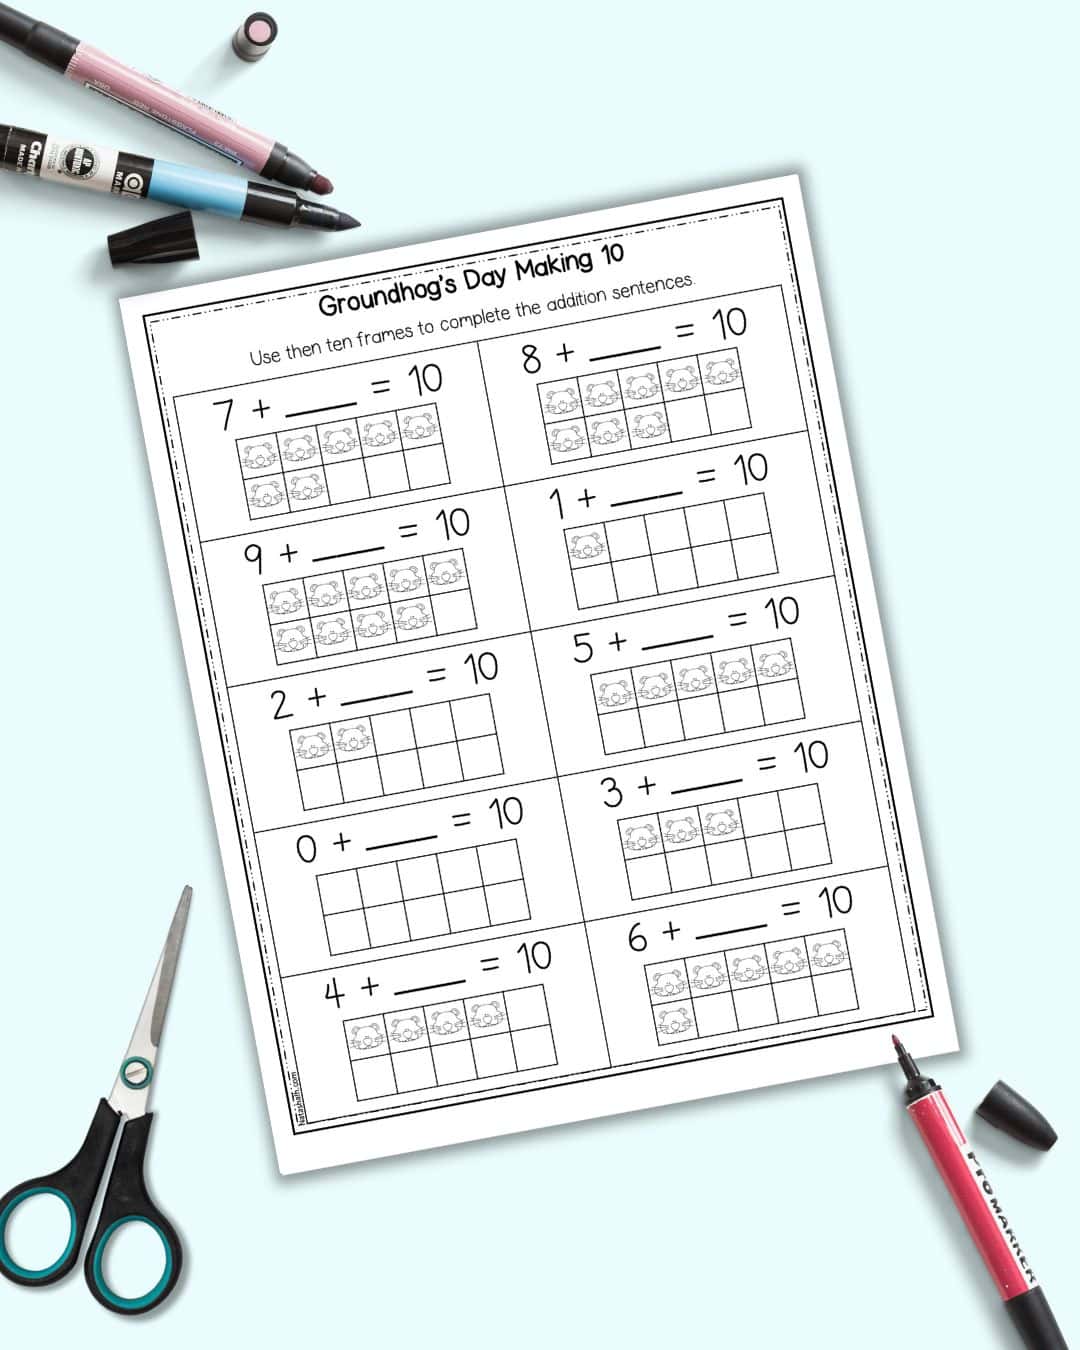 A preview of a Groundhog's Day themed making 10 worksheet with 10 frames